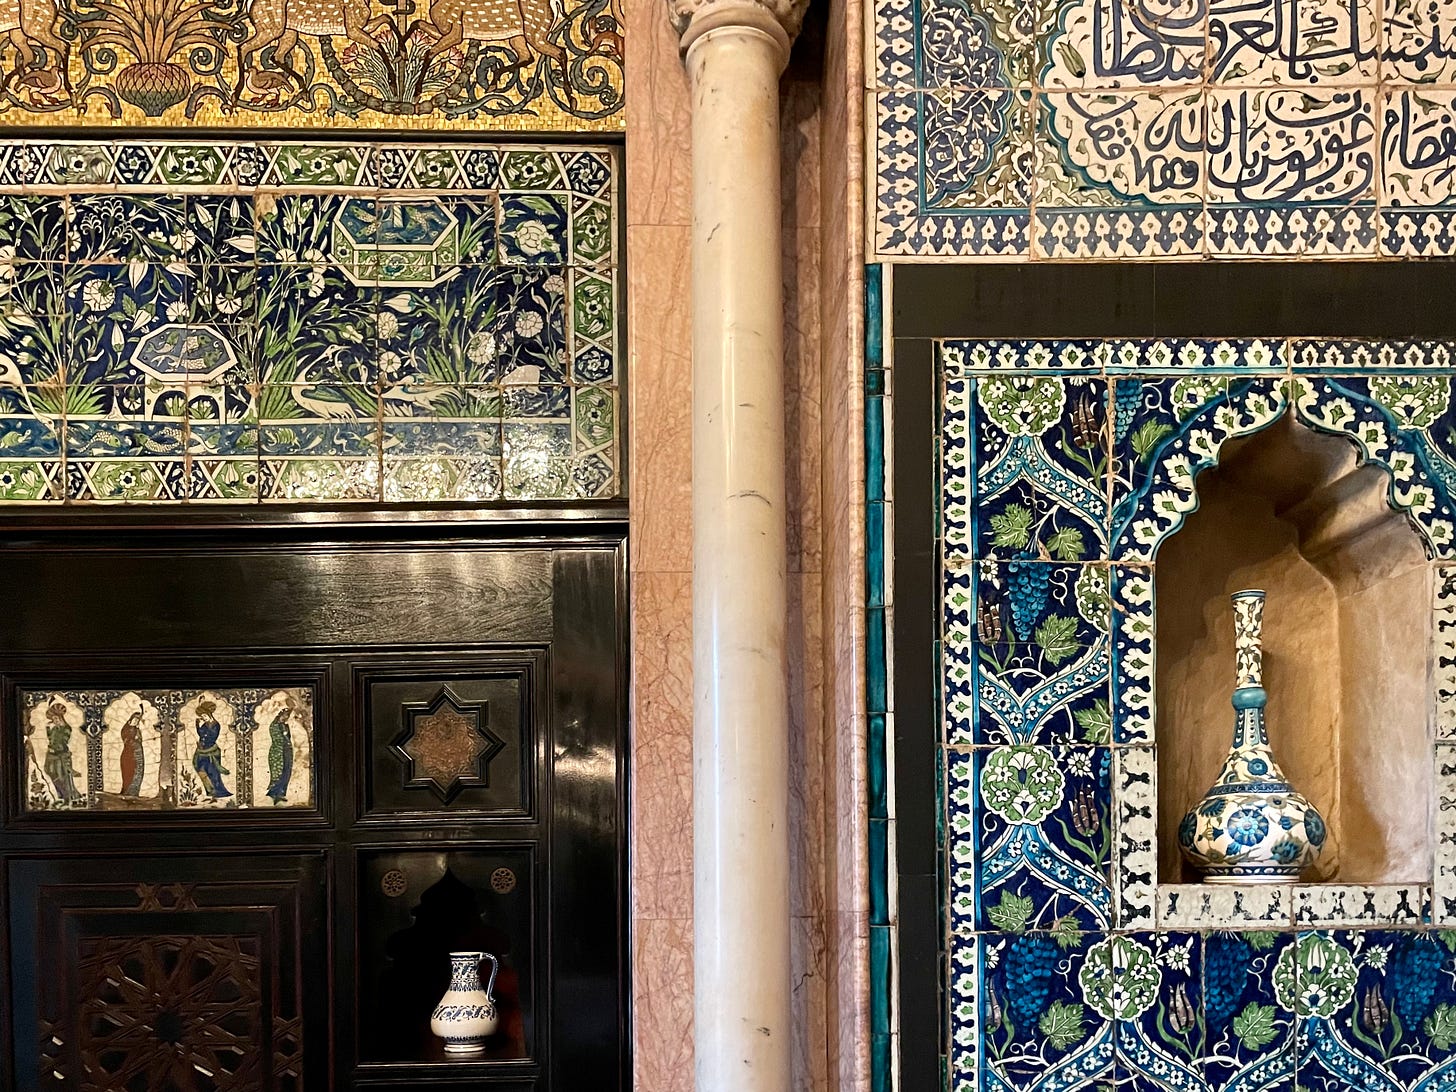 A detail of the Damascus tiles